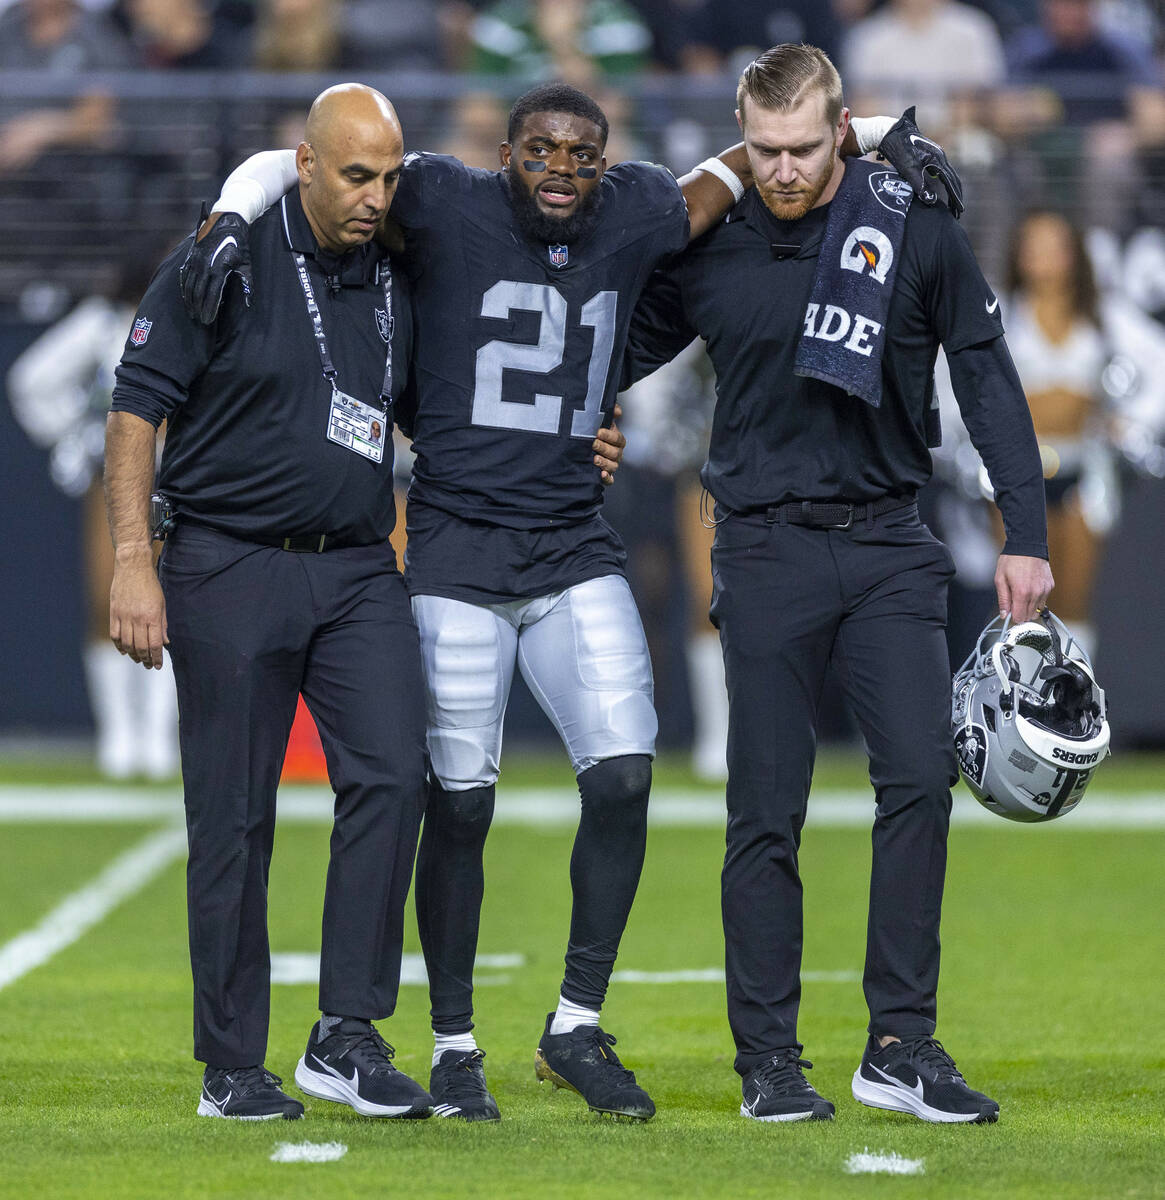 Raiders cornerback Amik Robertson (21) is assisted off the field after an injury against the Ne ...